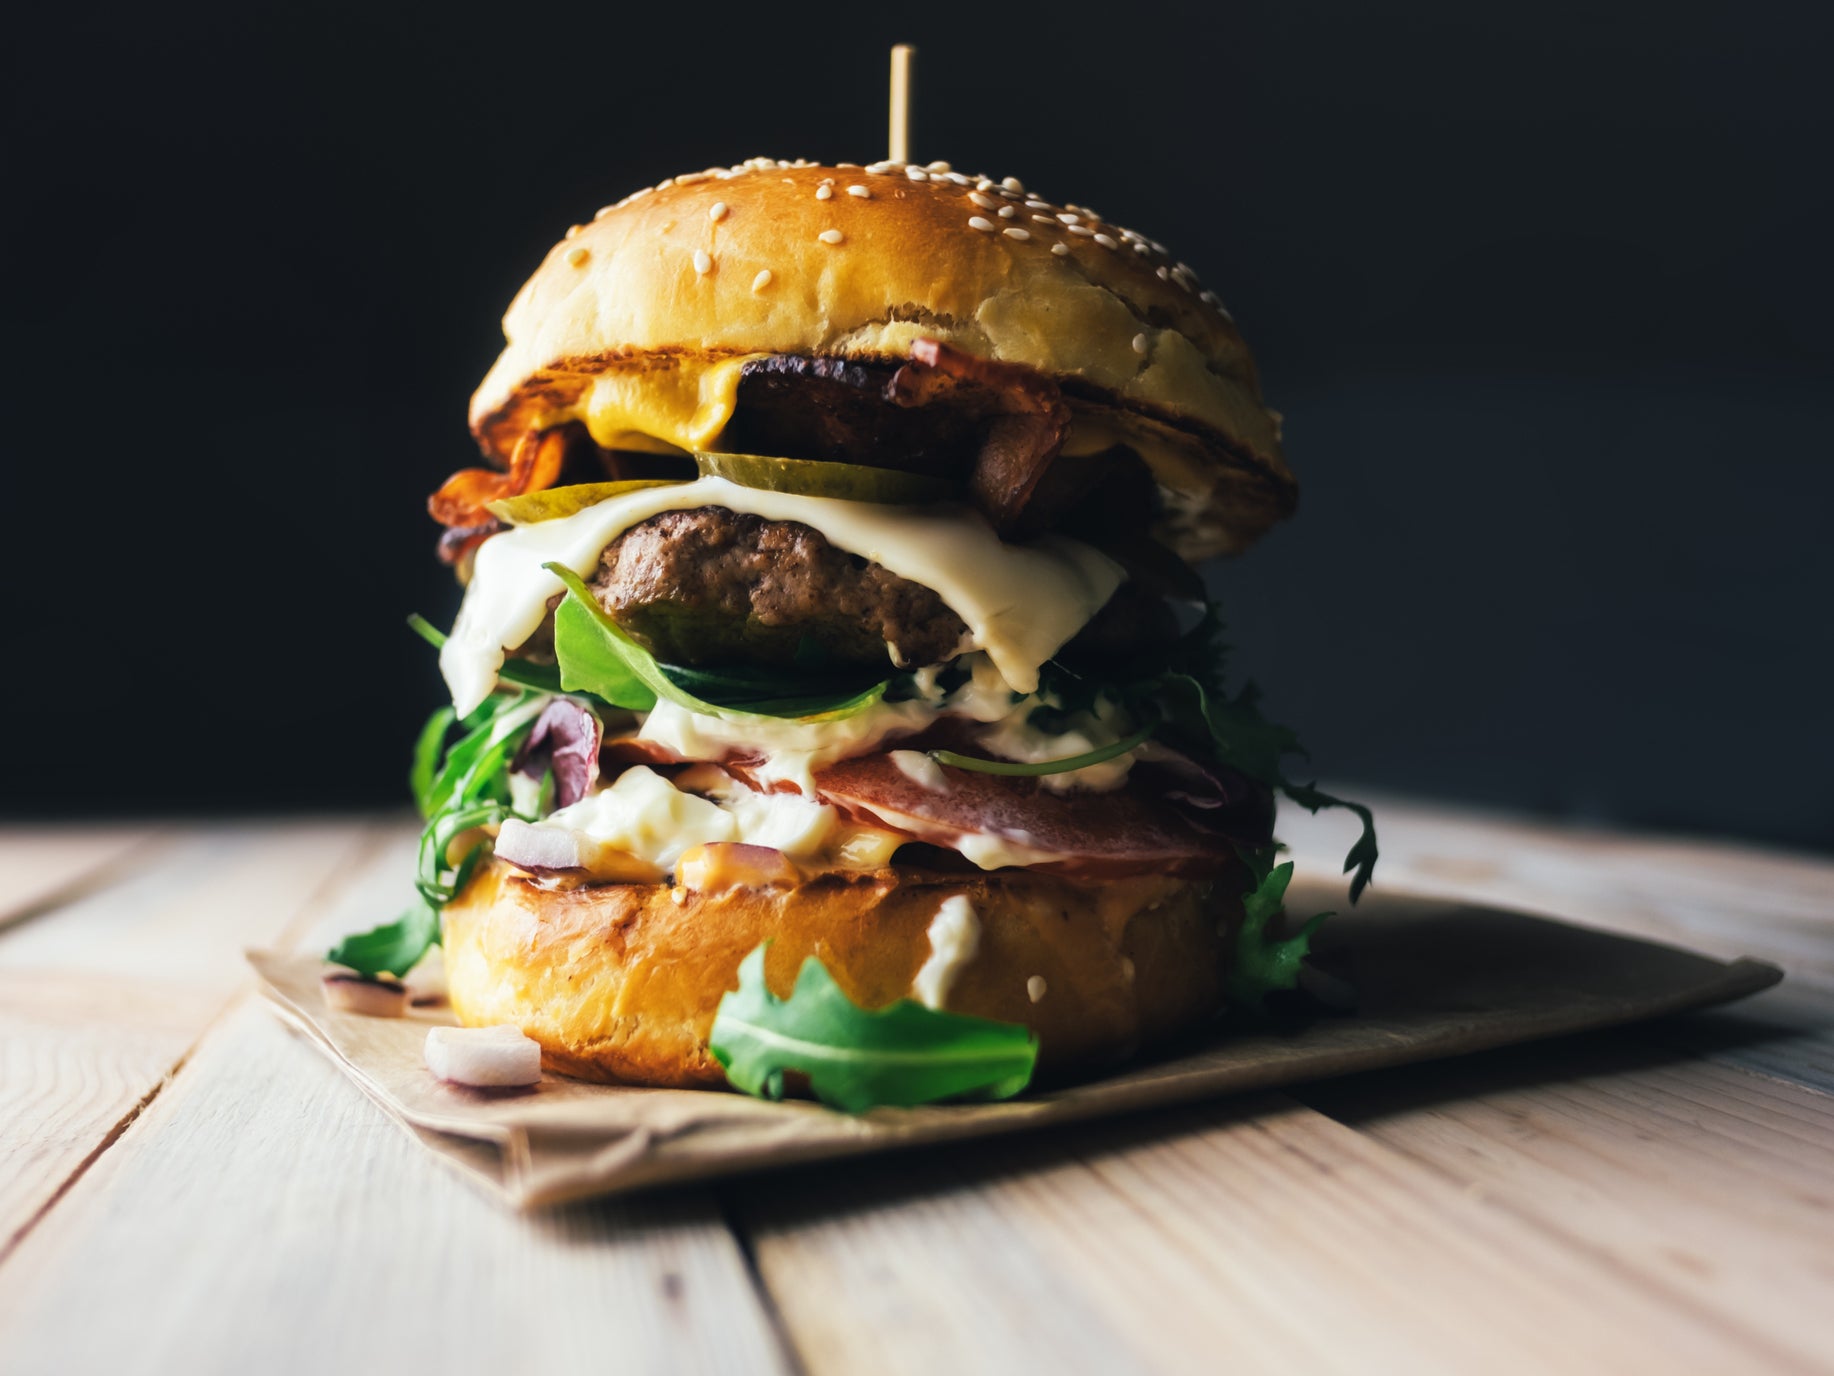 A burger on wooden table